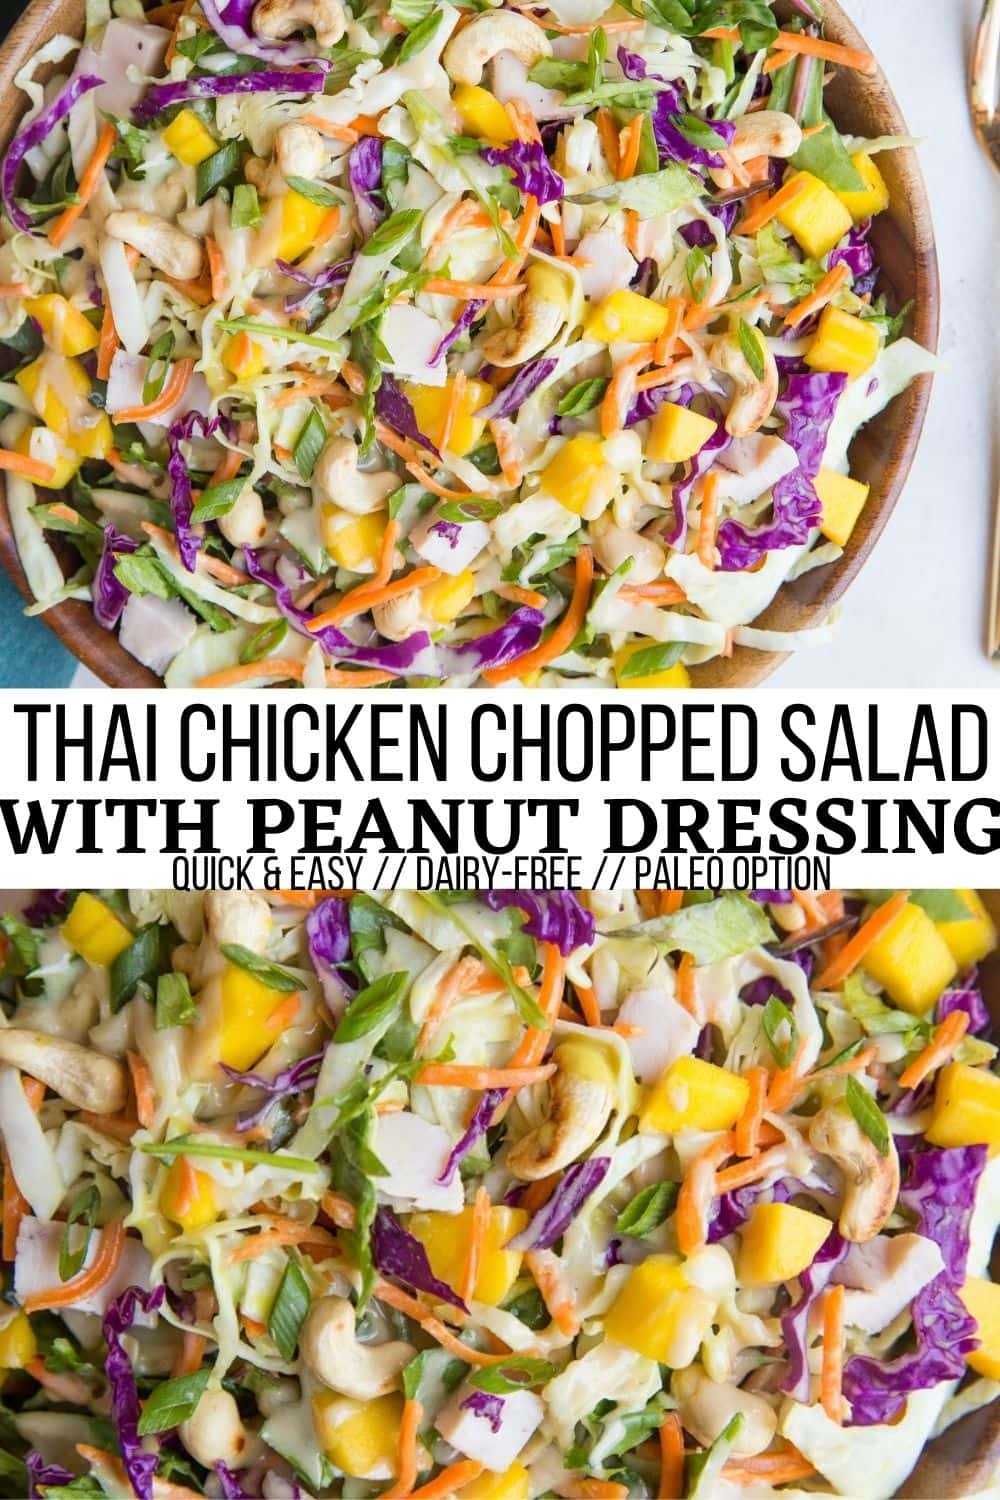 Thai Chicken Chopped Salad with peanut dressing is a light and refreshing meal. This healthy salad recipe is easy to throw together any night of the week and an excellent use for leftover chicken!